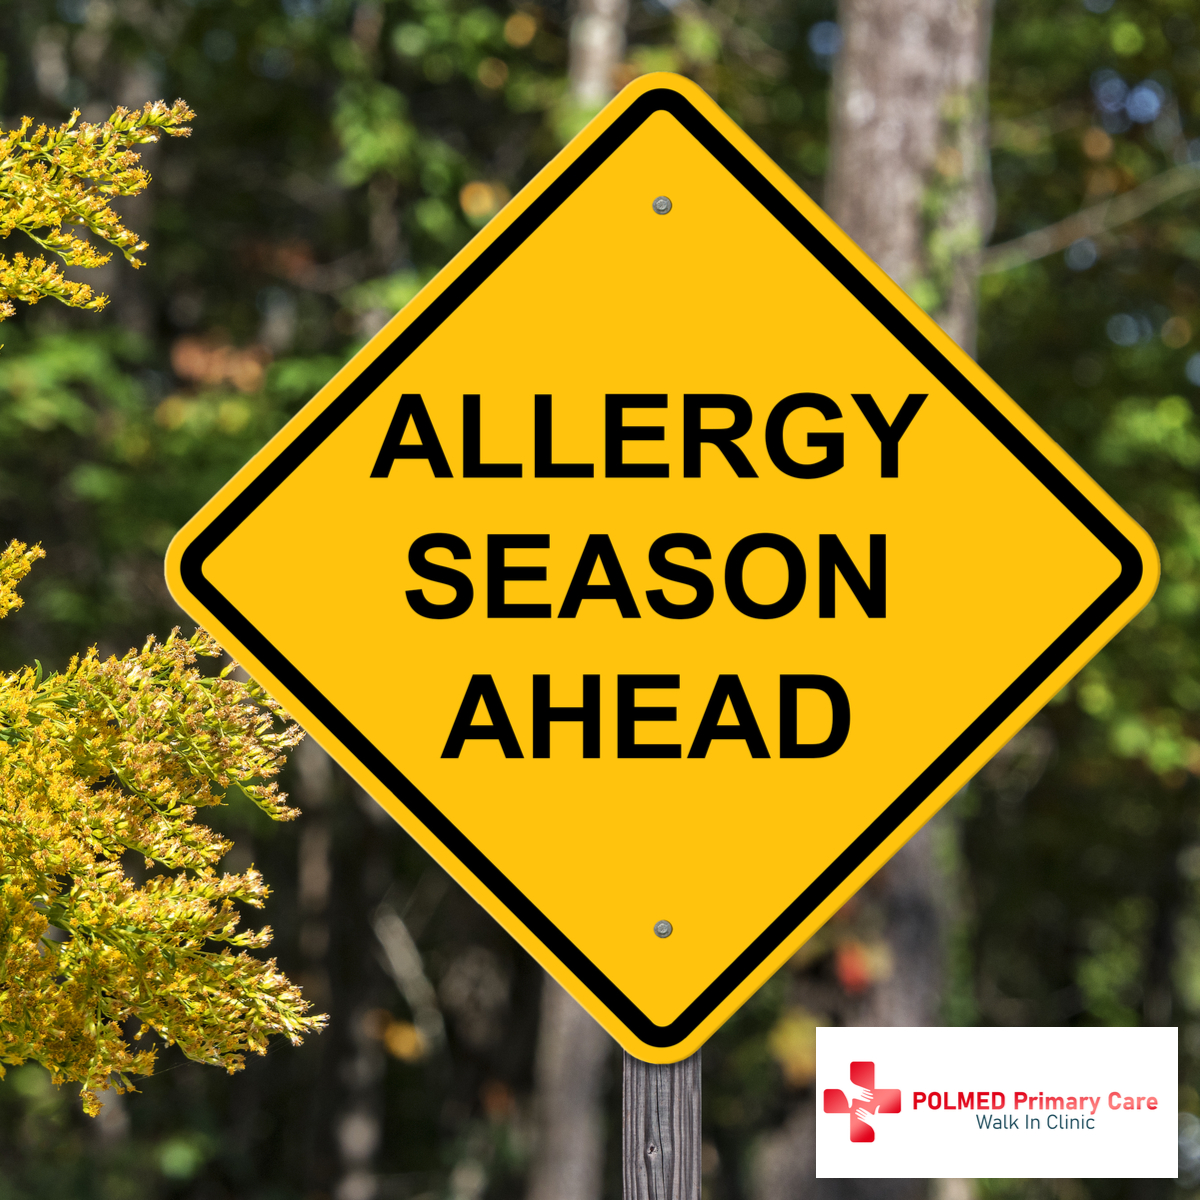 How Do You Get Tested for Allergies and What Can You Do to Make the Process Easier?